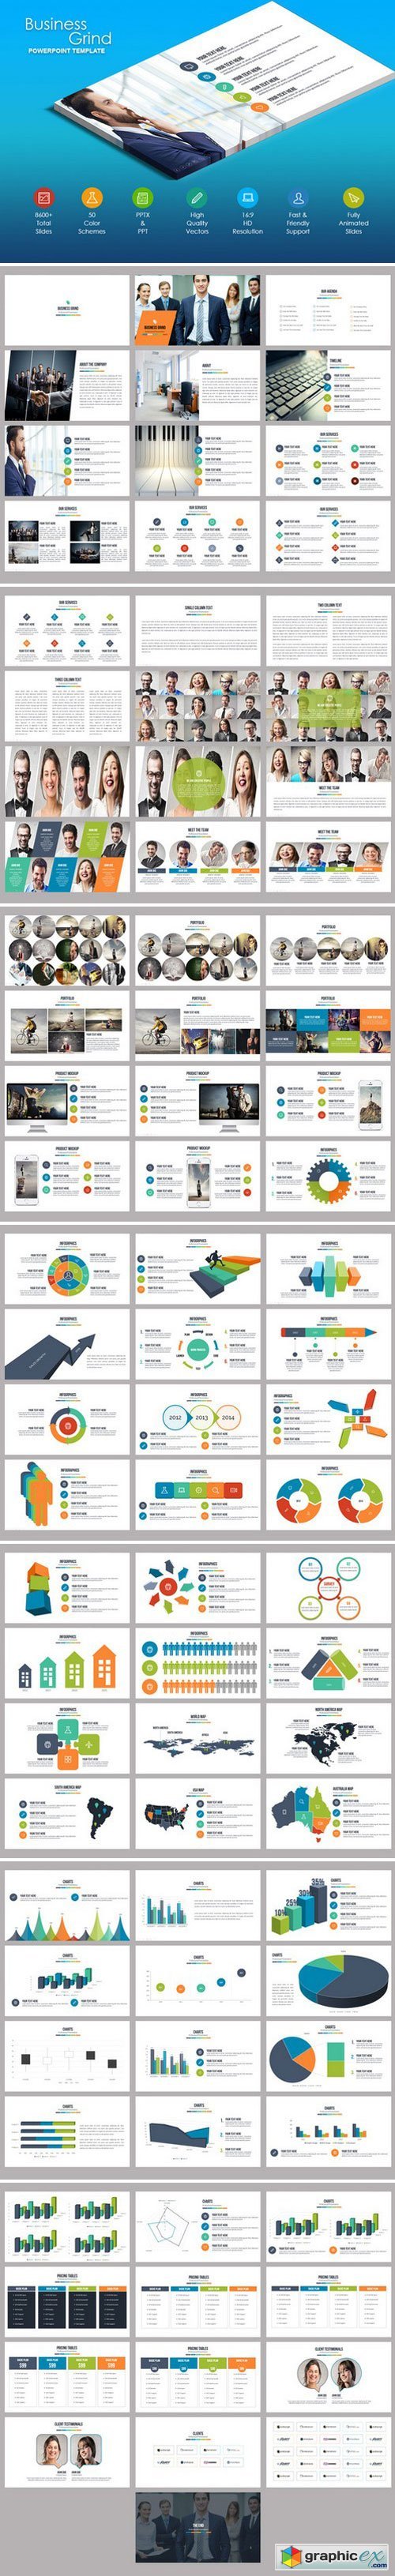 Business Grind Powerpoint Template